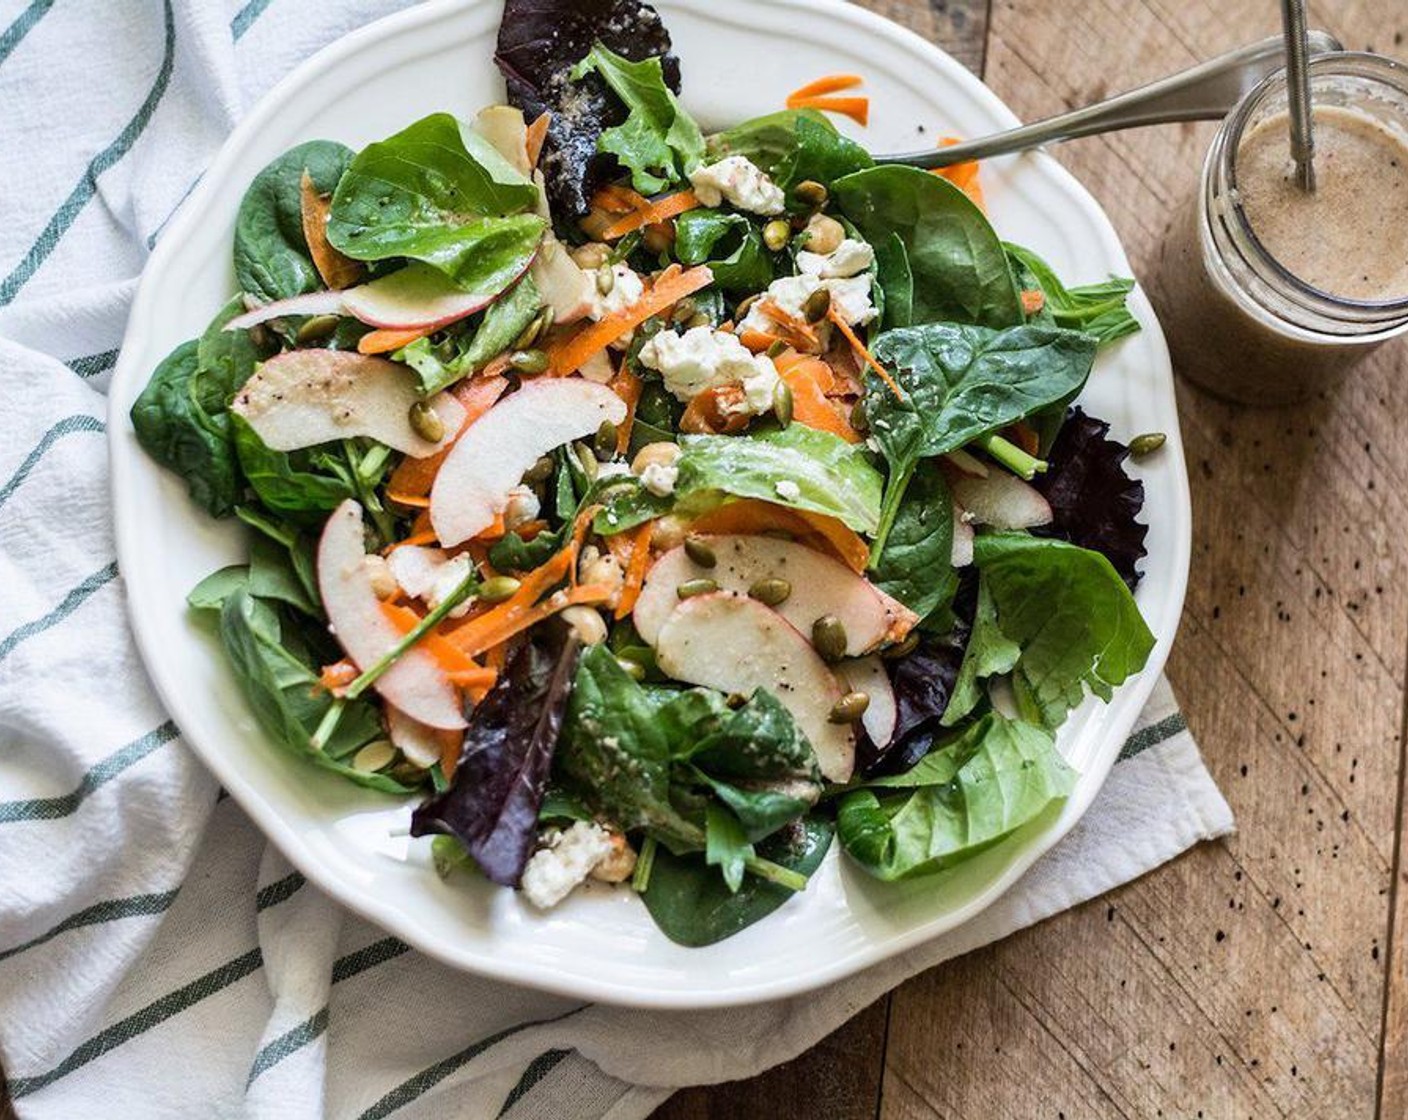 step 2 For the Salad: Divide Fresh Spinach (4 cups), Carrot (1), Apple (1), Canned Chickpeas (1/4 cup), Goat Cheese (4 Tbsp) and Pepitas (2 Tbsp) into two large plates or bowls, drizzle with dressing, serve and enjoy.